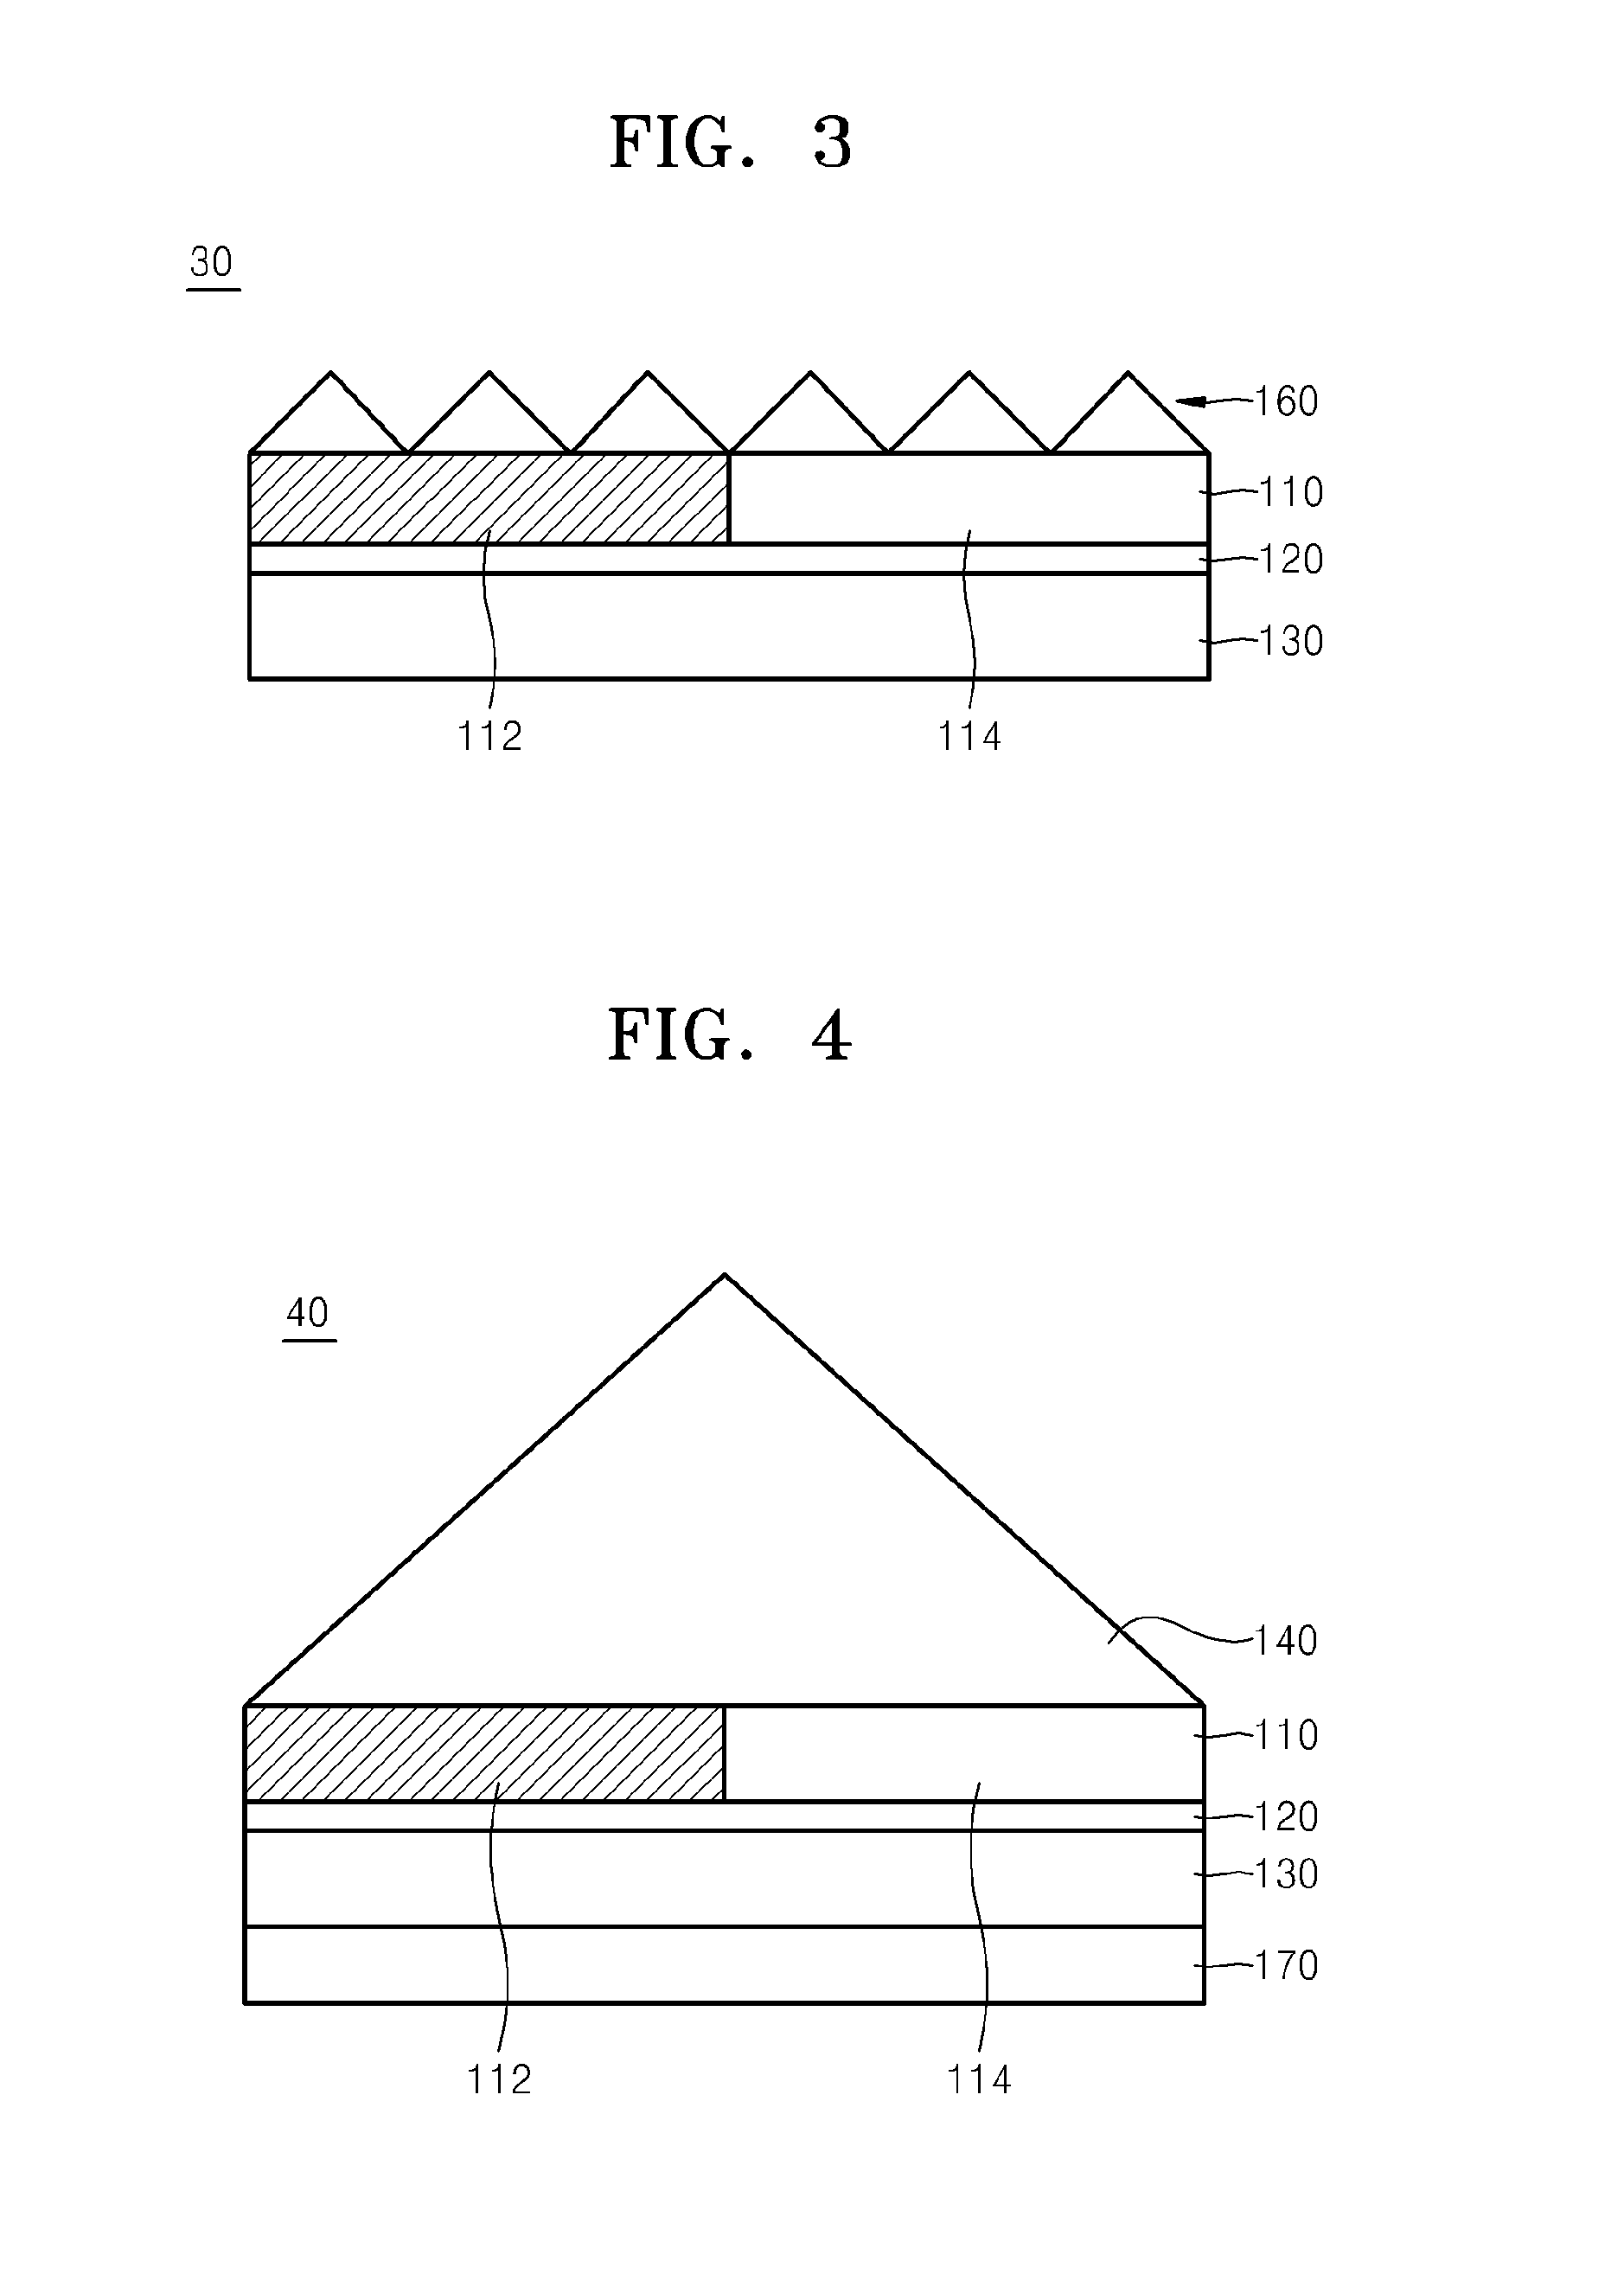 Spatial light modulators, holographic 3-dimensional display apparatuses including the spatial light modulators, and methods of modulating spatial light